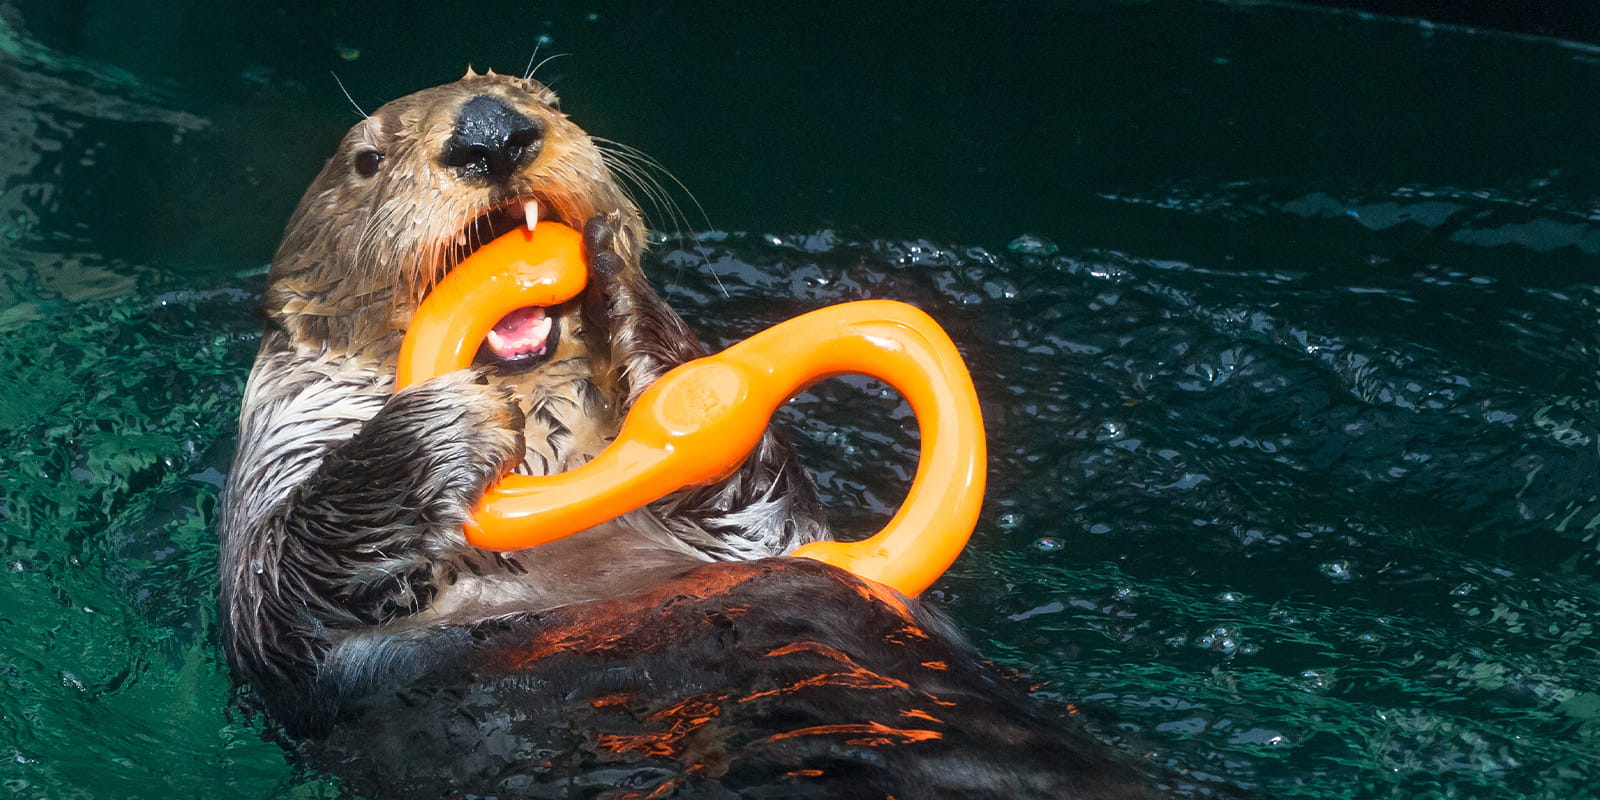 A sea otter at the Seattle Aquarium floating on its back in the sea otter habitat, holding and chewing on a s-shaped curved enrichment toy.